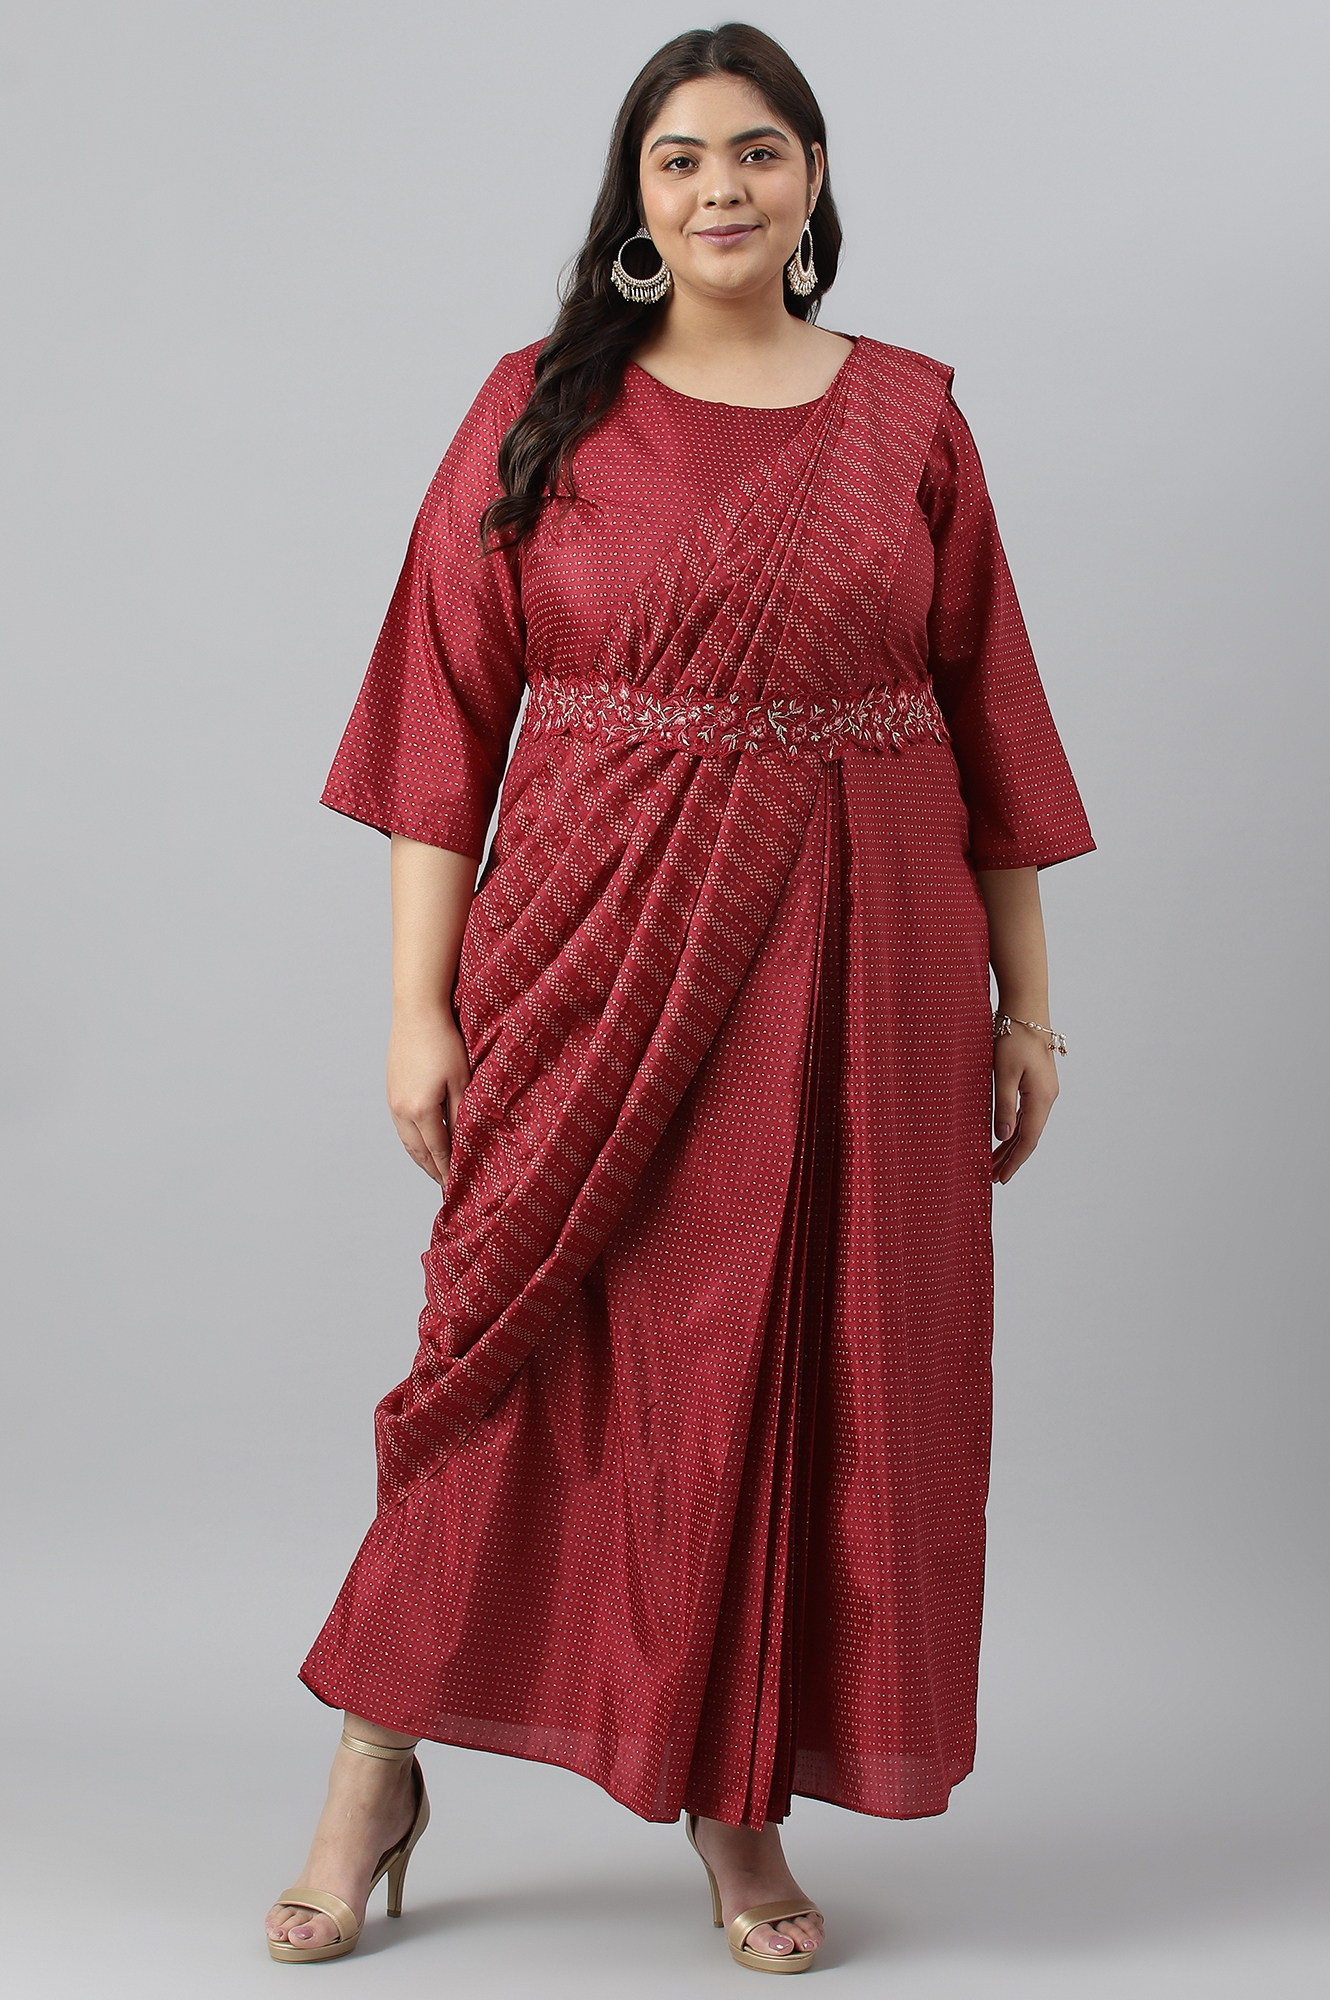 W Plus Size Maroon Insta Saree Dress with Embroidered Belt